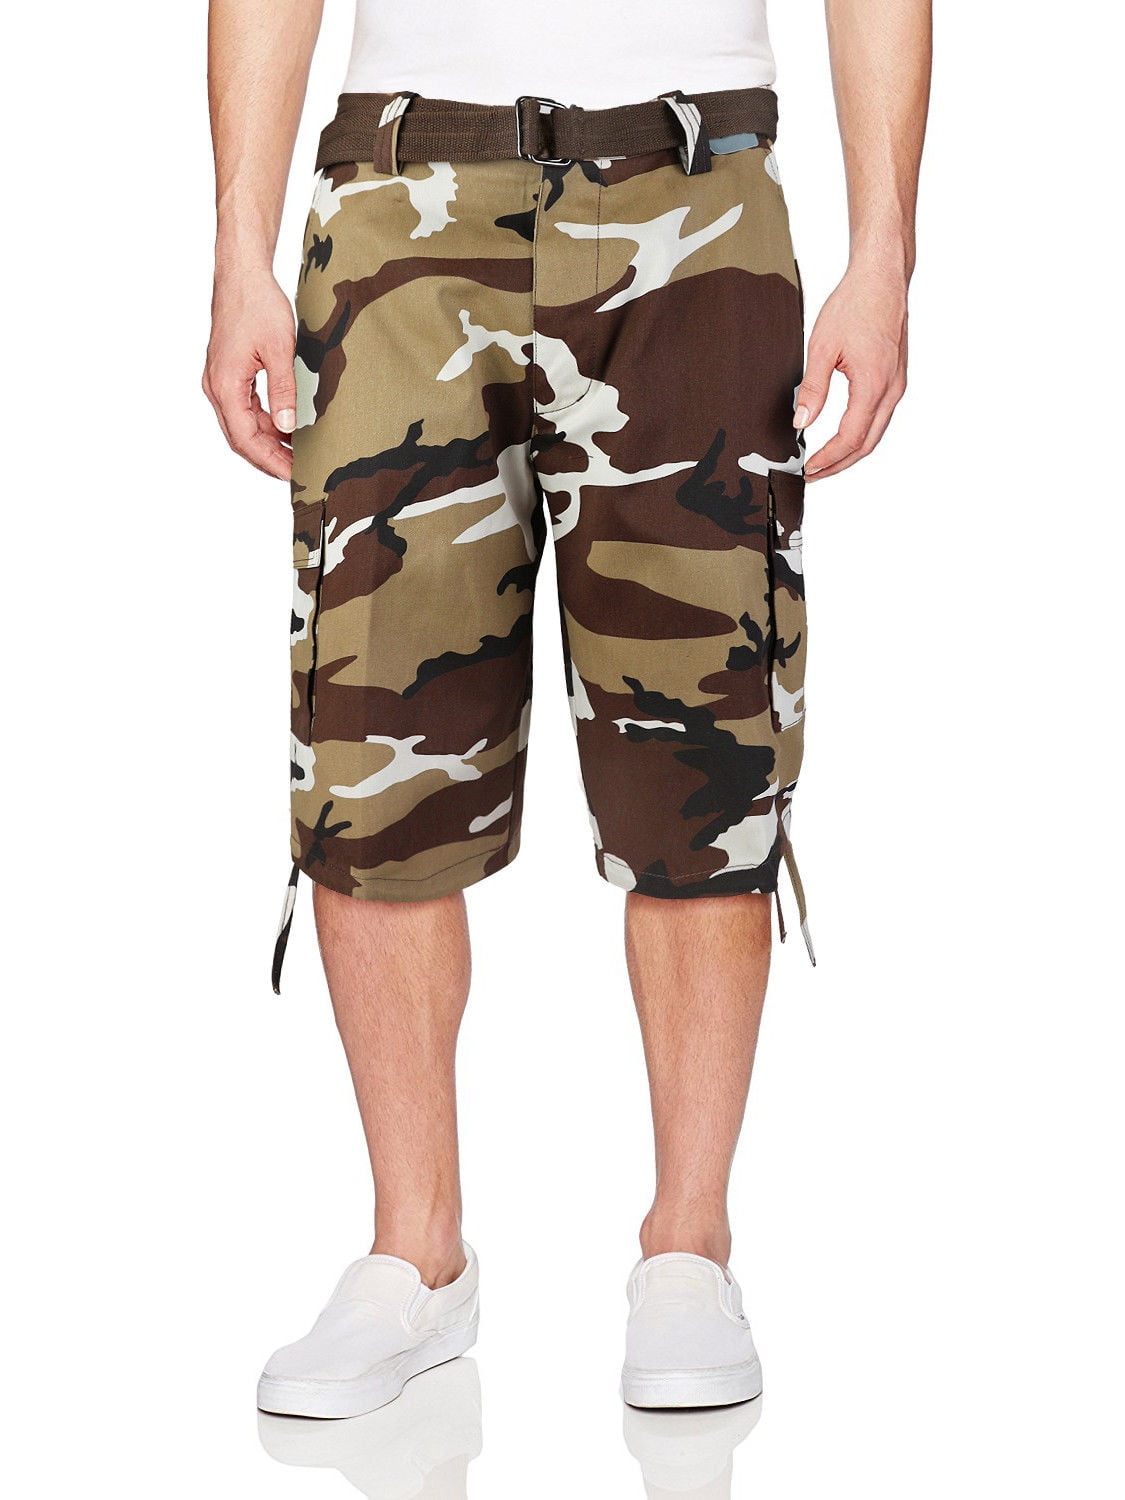 What To Wear With Army Camo Shorts